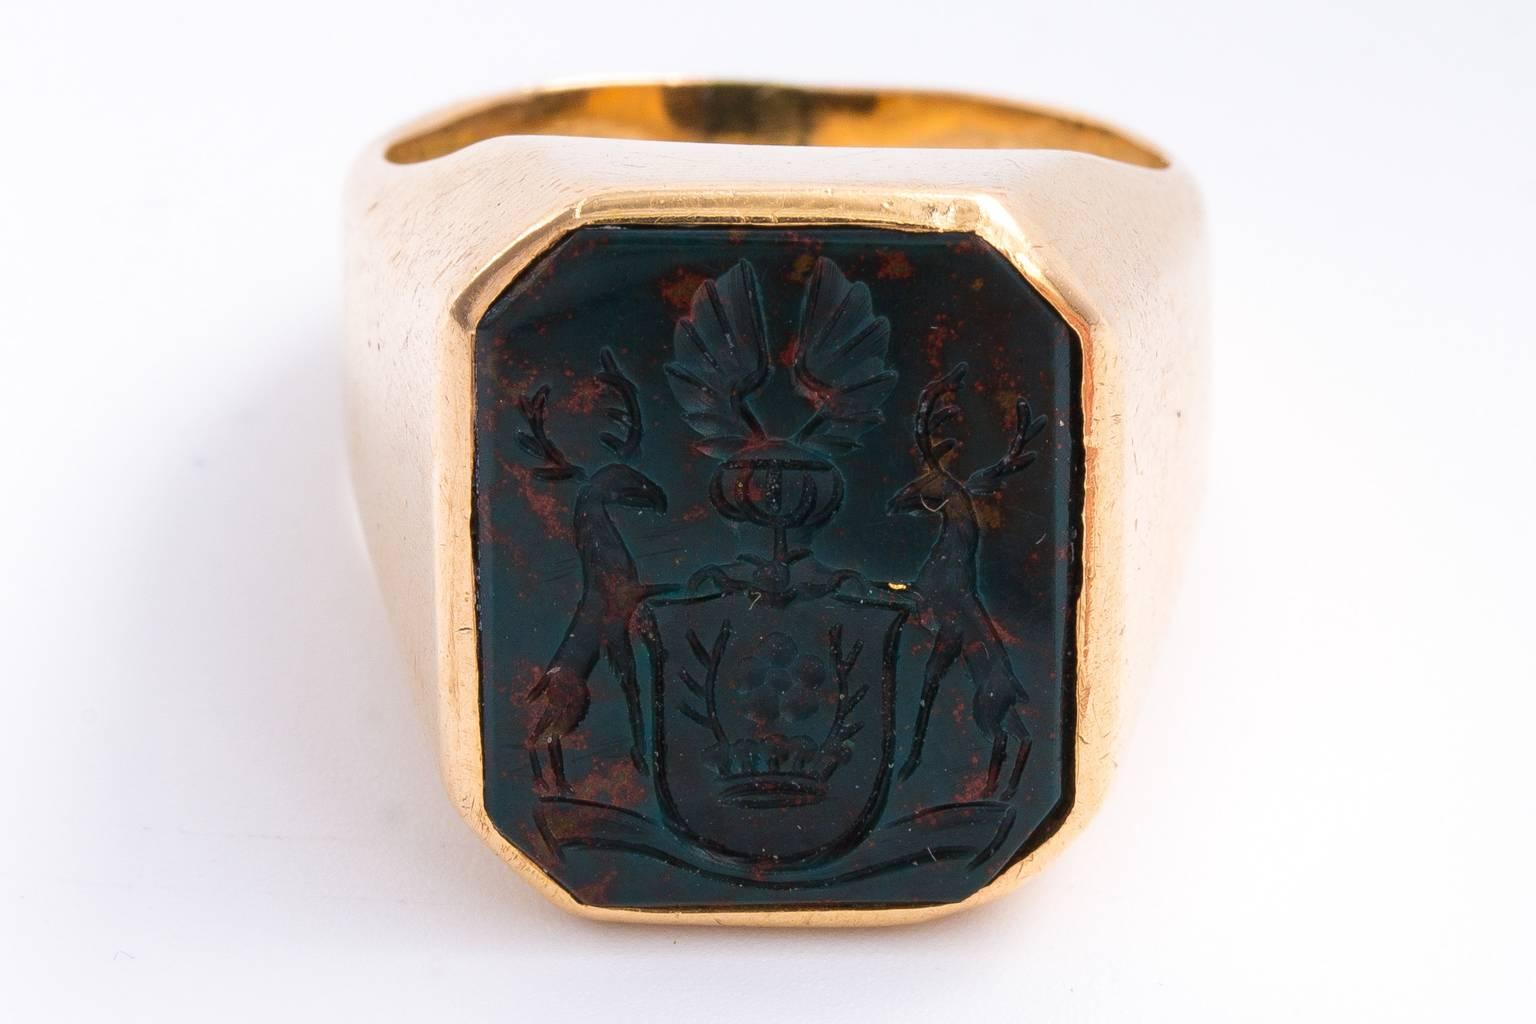 Beautifully carved figural family crest intaglio set into a sophisticated 14ct gold shank and setting. Intaglio may be 18th century or earlier. Setting is 19th century. Ring size is 8.5. Weight is 19.30 grams.